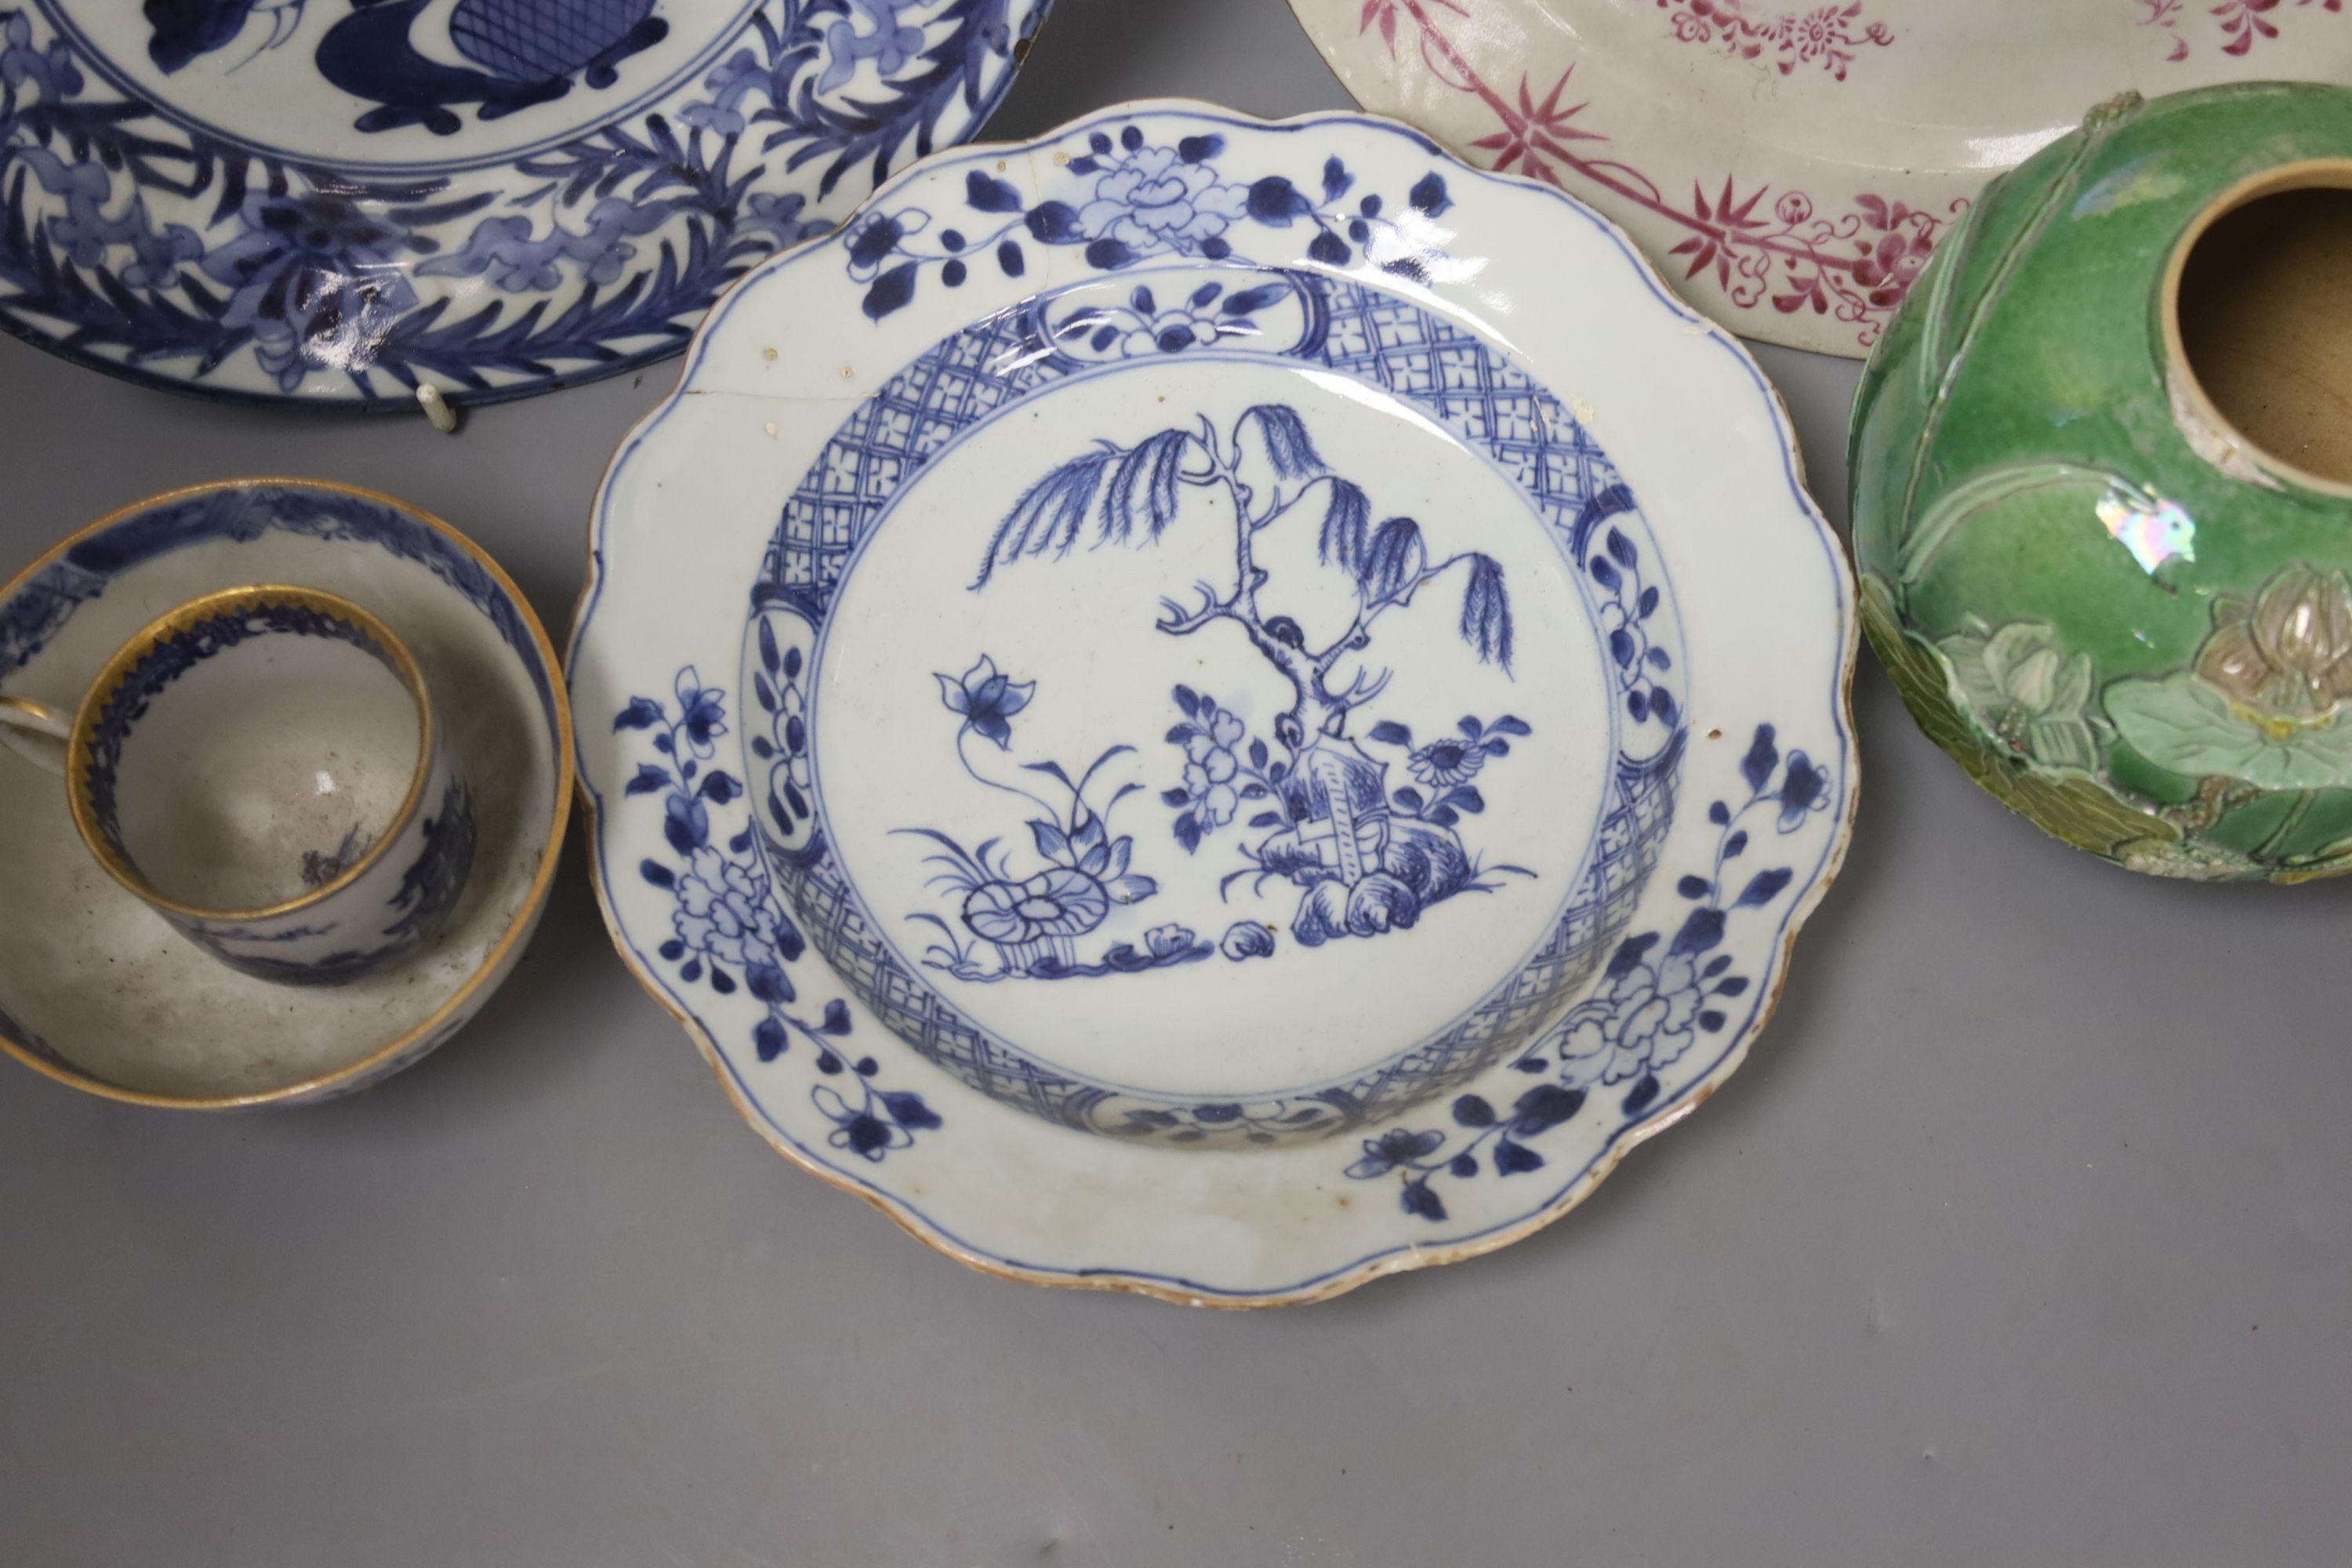 A group of Chinese porcelain, 18th/19th century and an 18th century Japanese Arita blue and white plate, 21.5cm